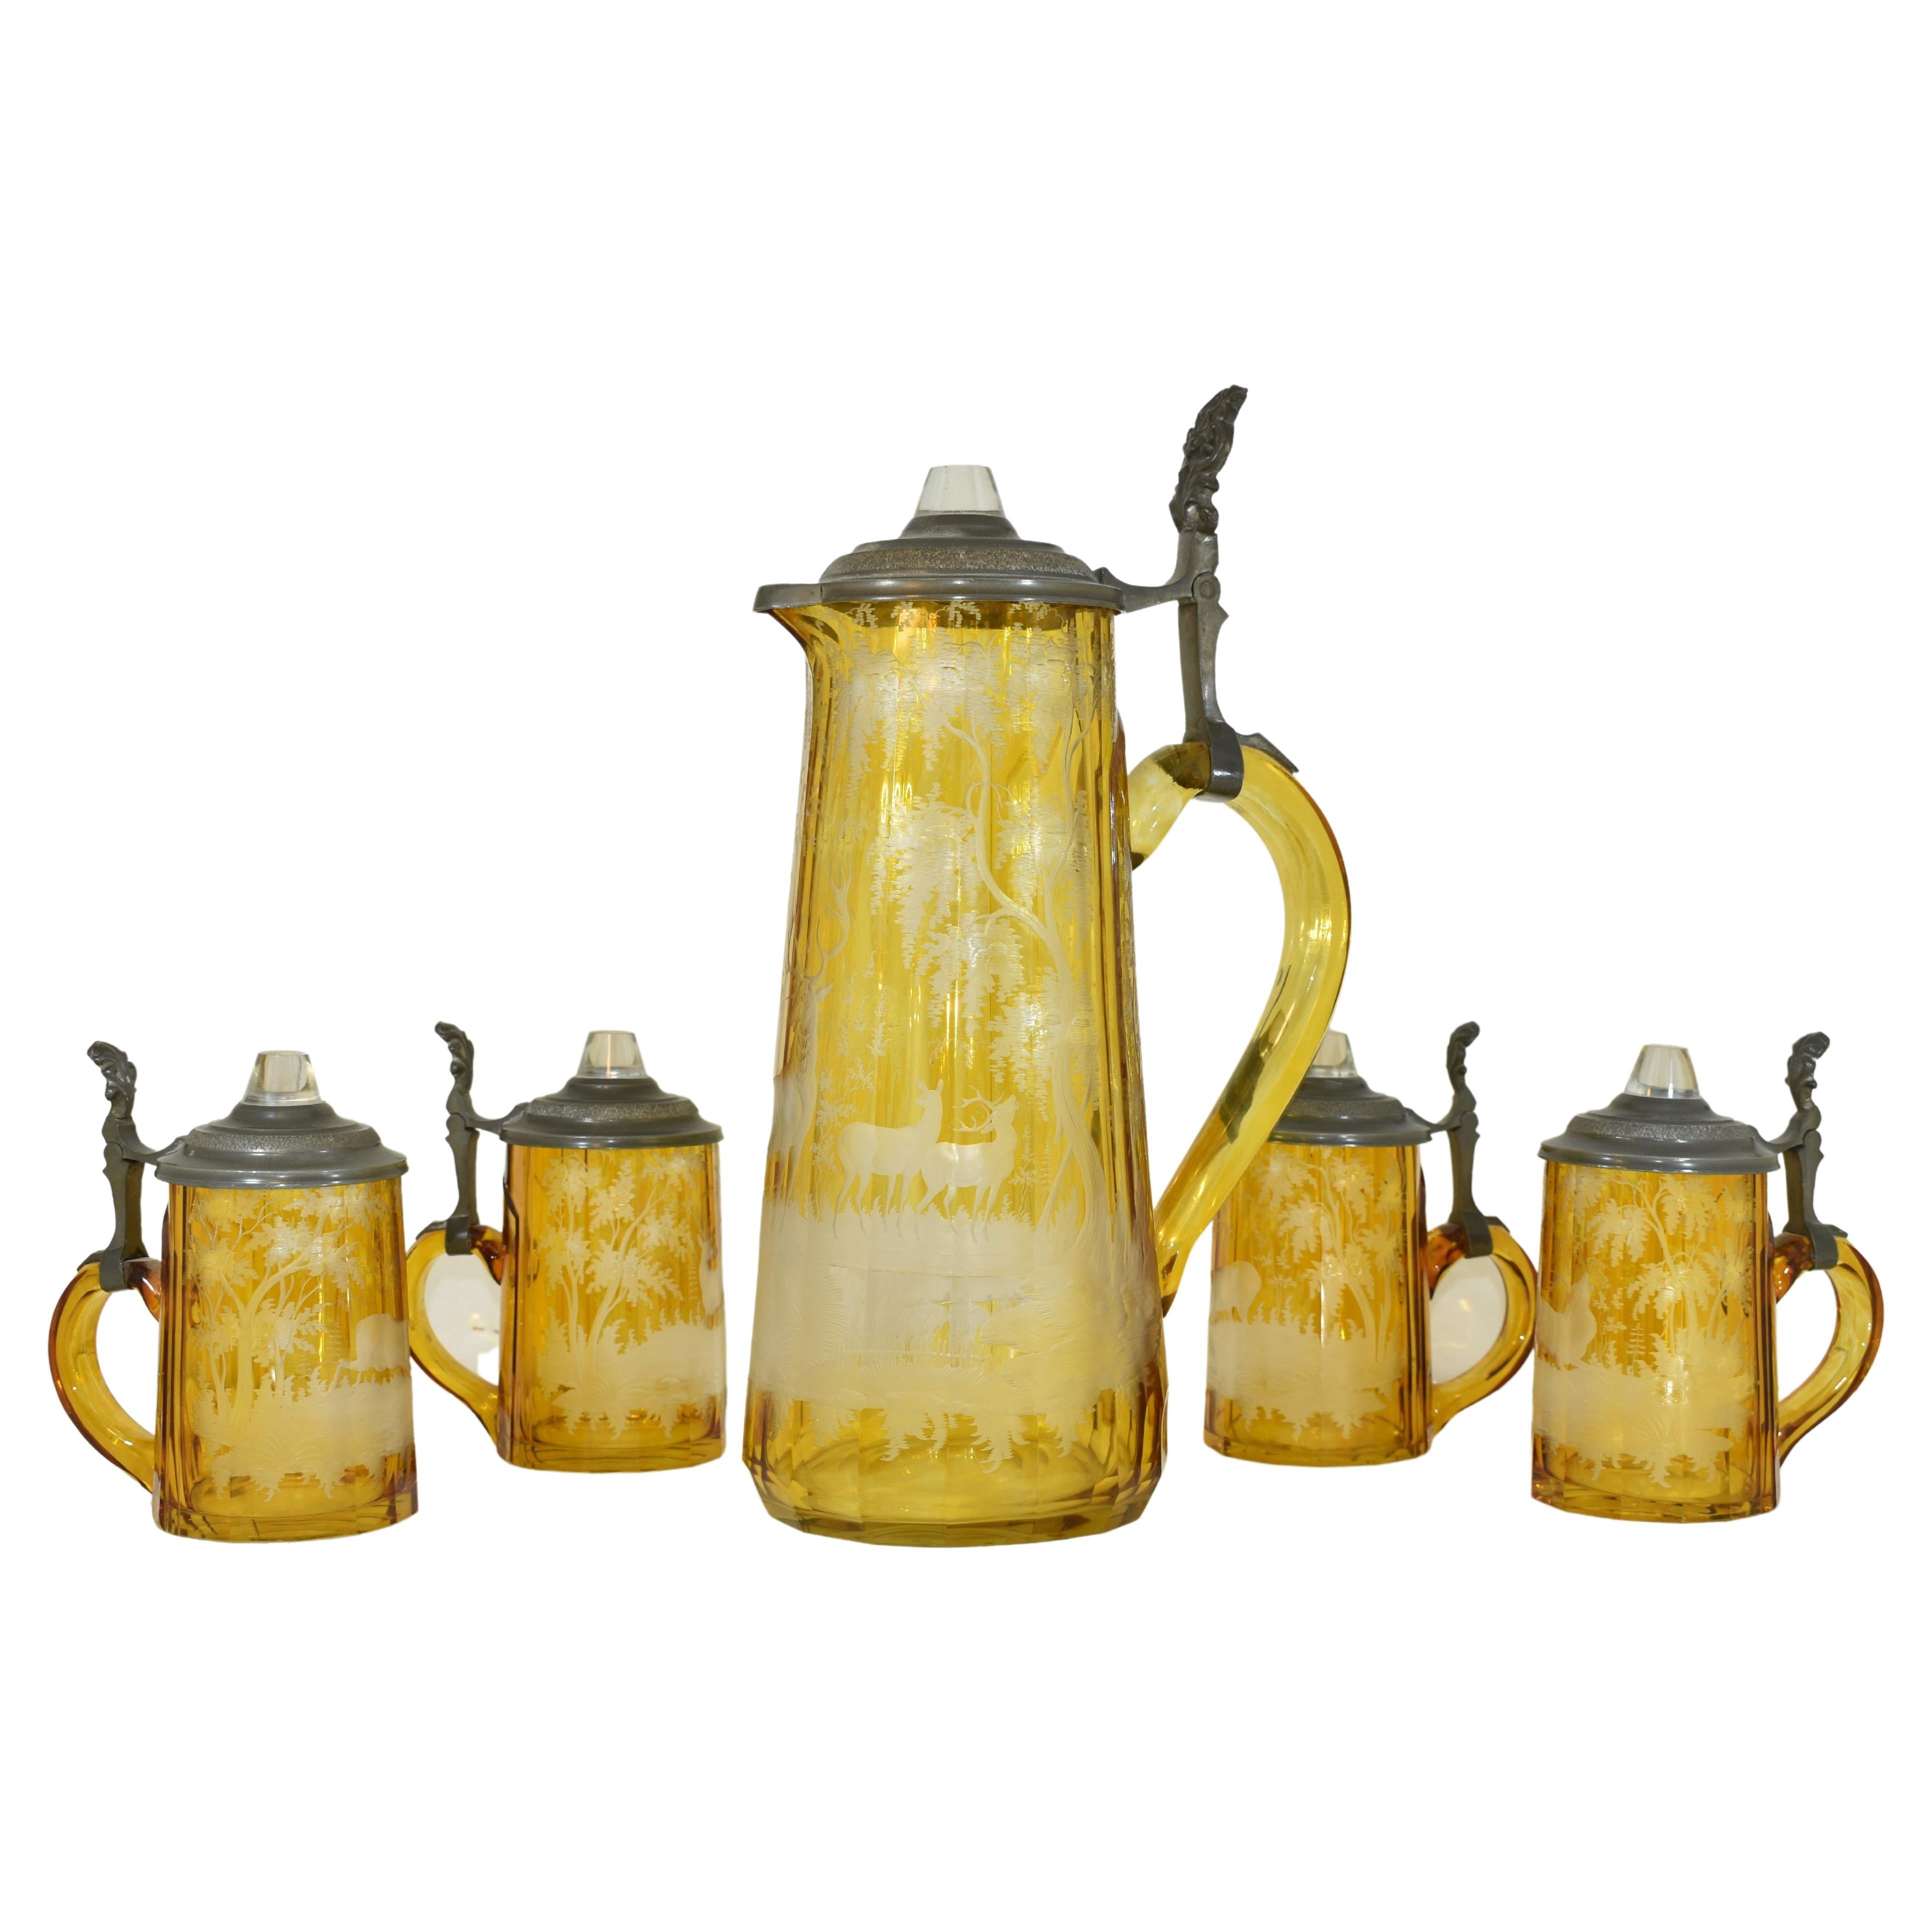 Set of a jug and four matching glasses, finely engraved all around with scenes of nature, the jug's polygonal body features a continuous forest scene with deer and stags among vegetation and massive, spreading trees, both glasses with further scenes